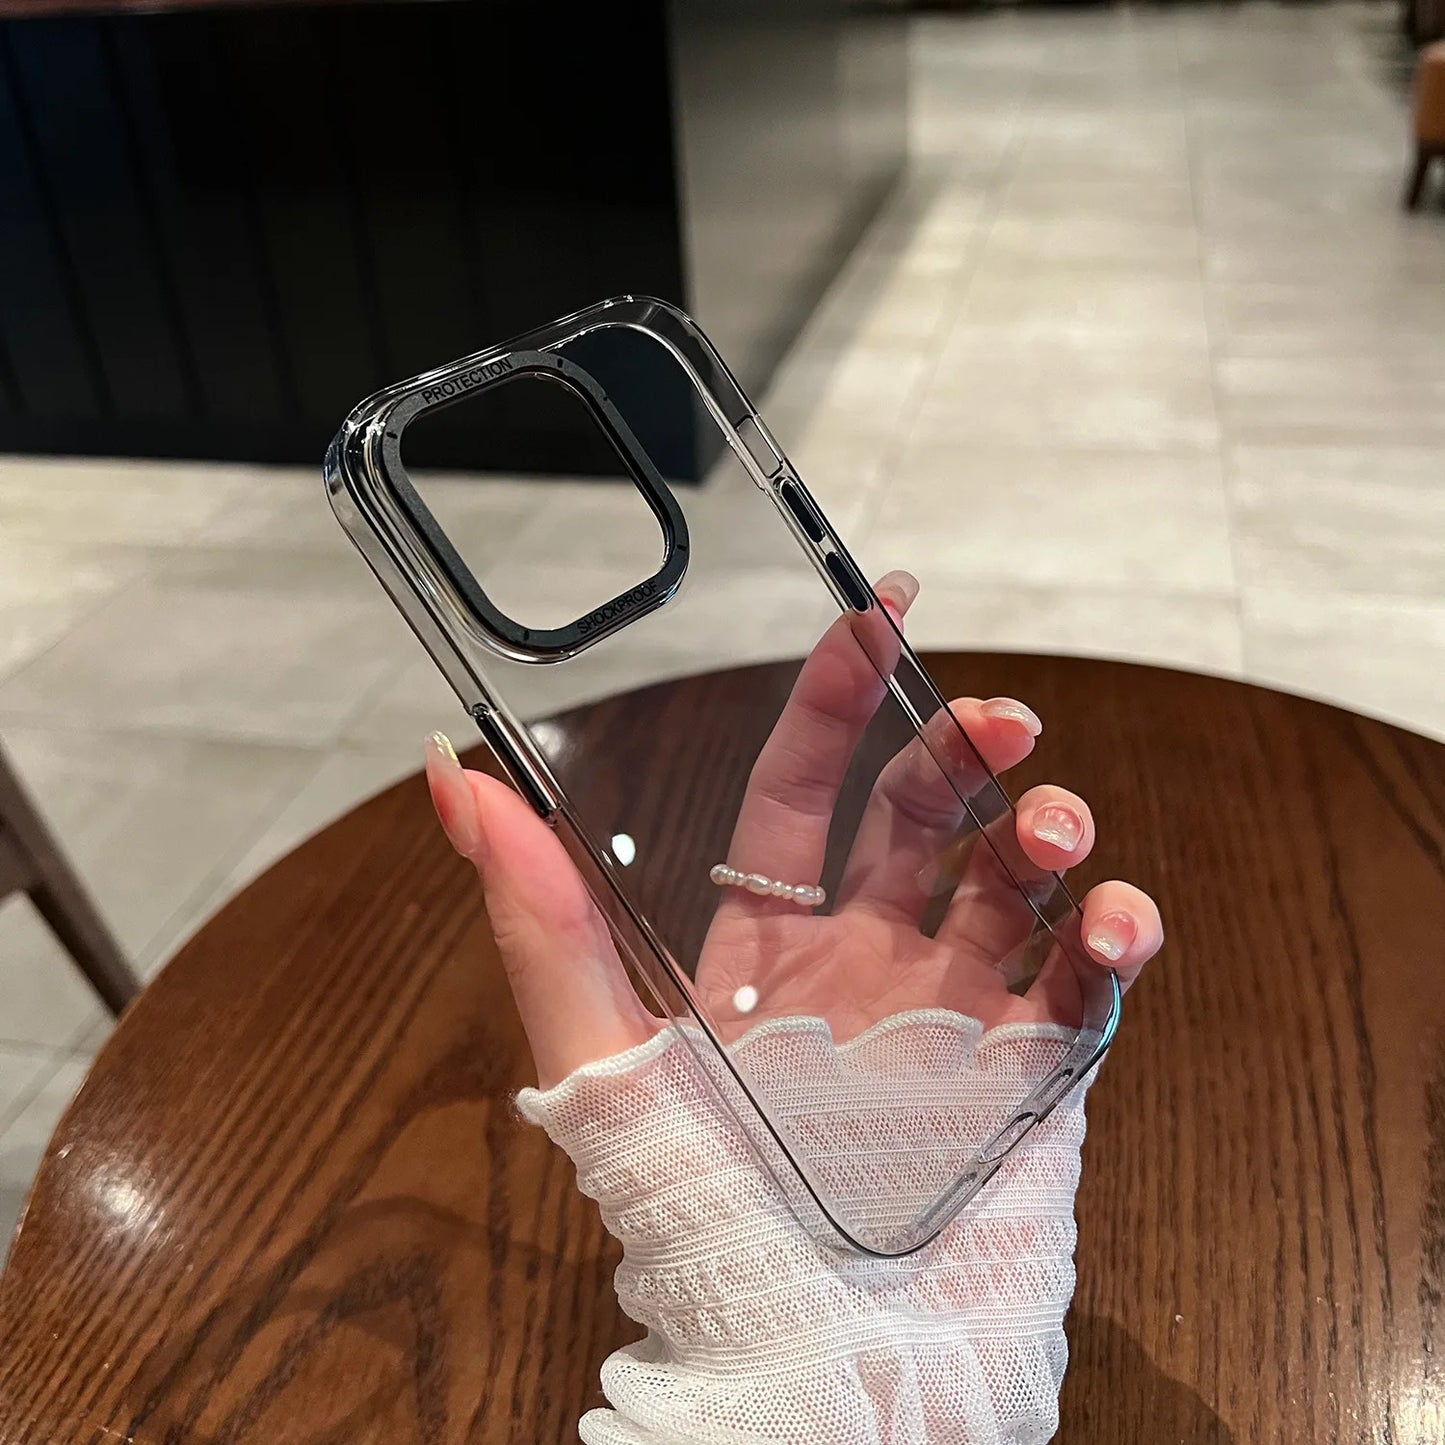 Advanced Metal Frame Clear Cover